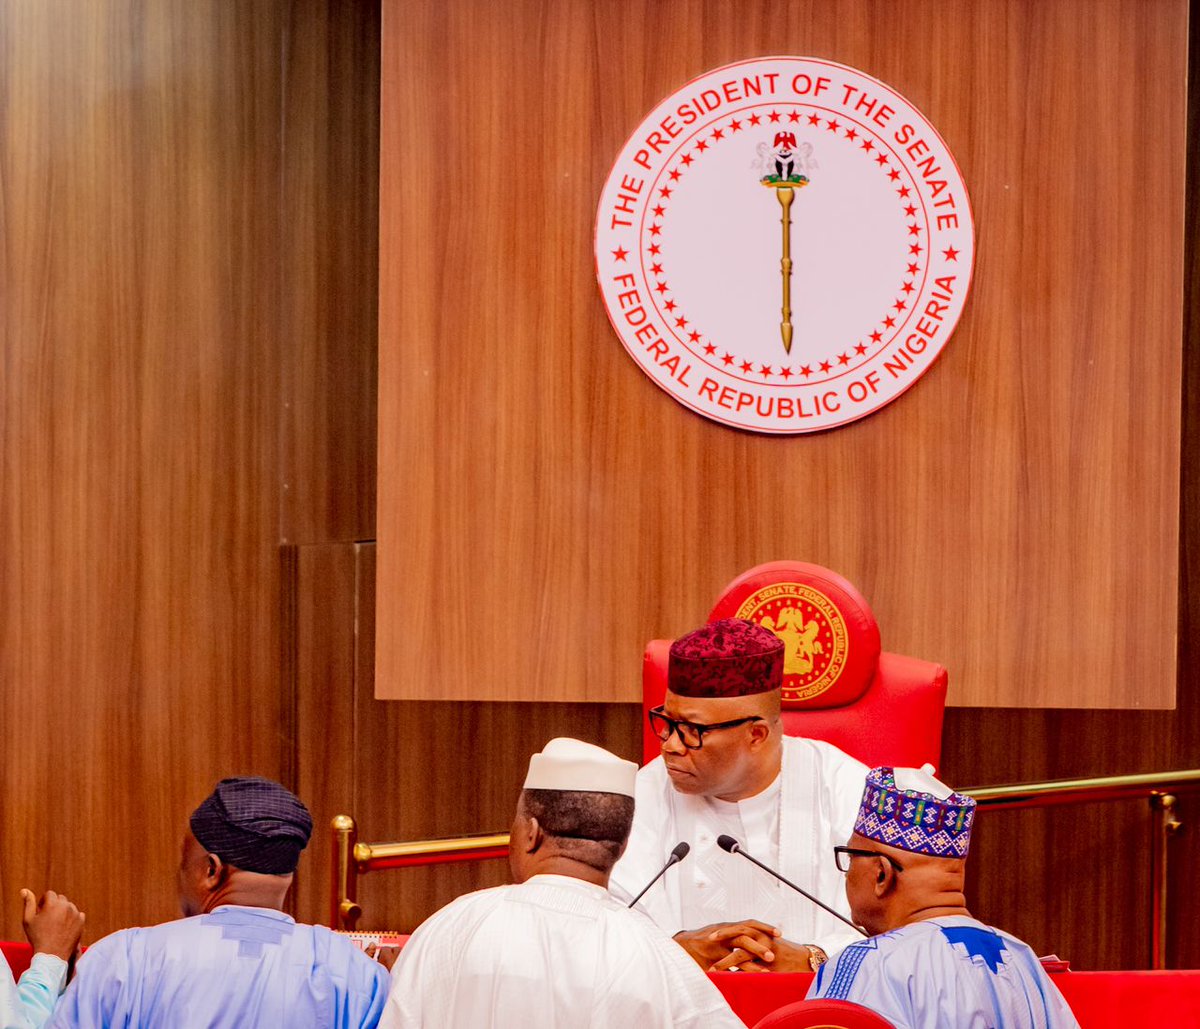 The Nigerian Senate, today resumed Plenary after Easter and Sallah holidays. President of the Senate, Godswill Akpabio presided over proceedings at the resumed sitting.